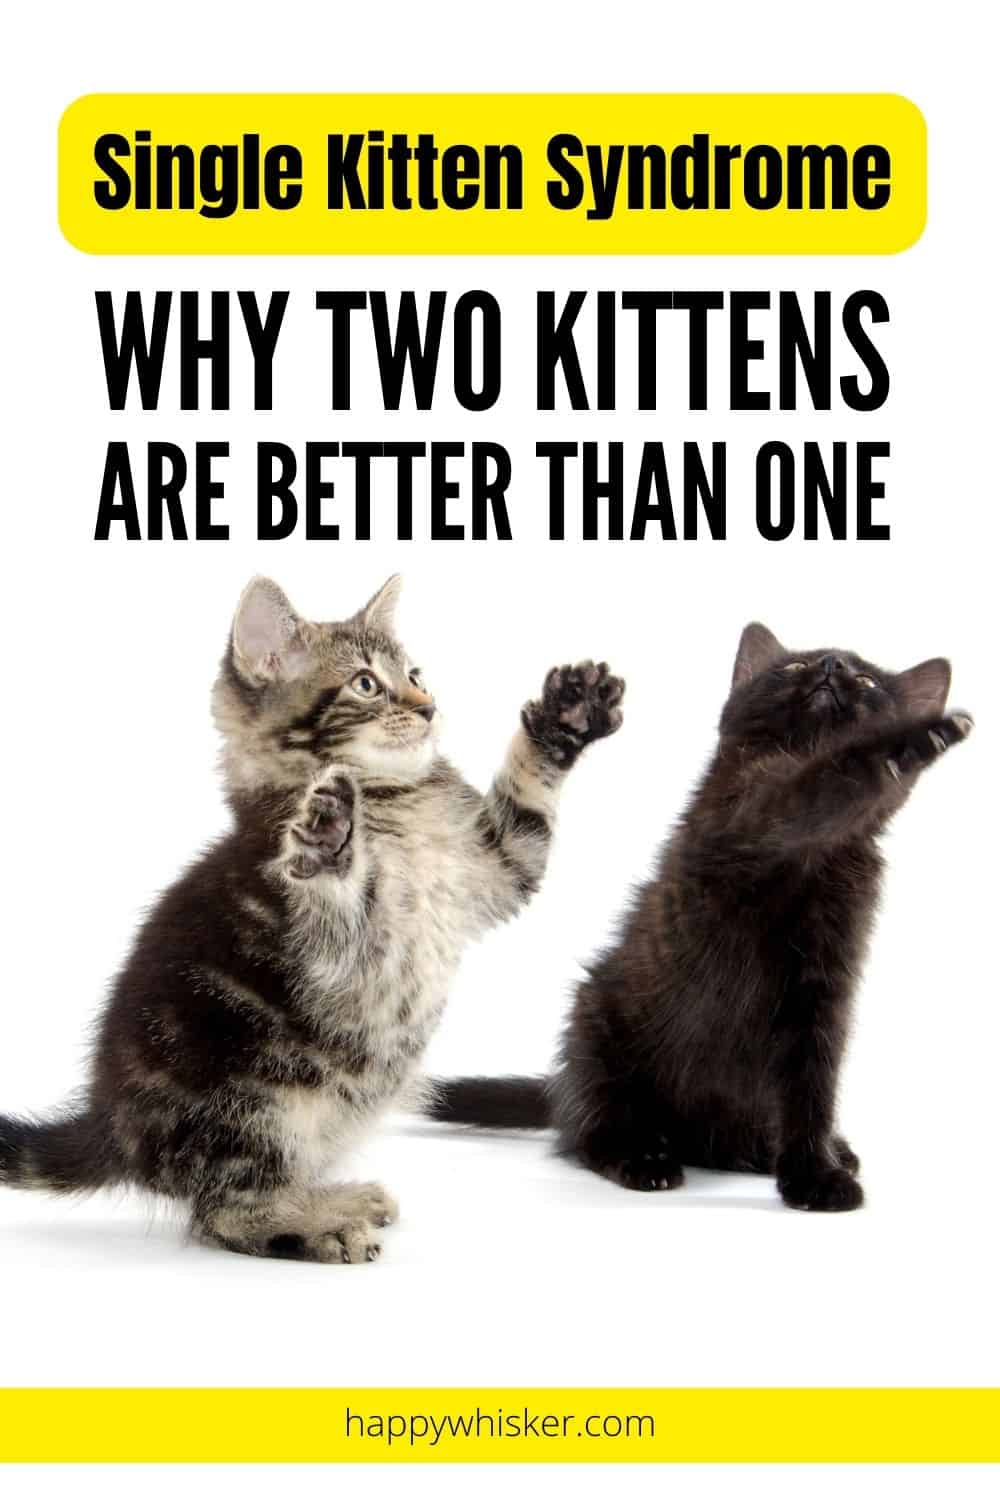 Single Kitten Syndrome - Why Two Kittens Are Better Than One Pinterest